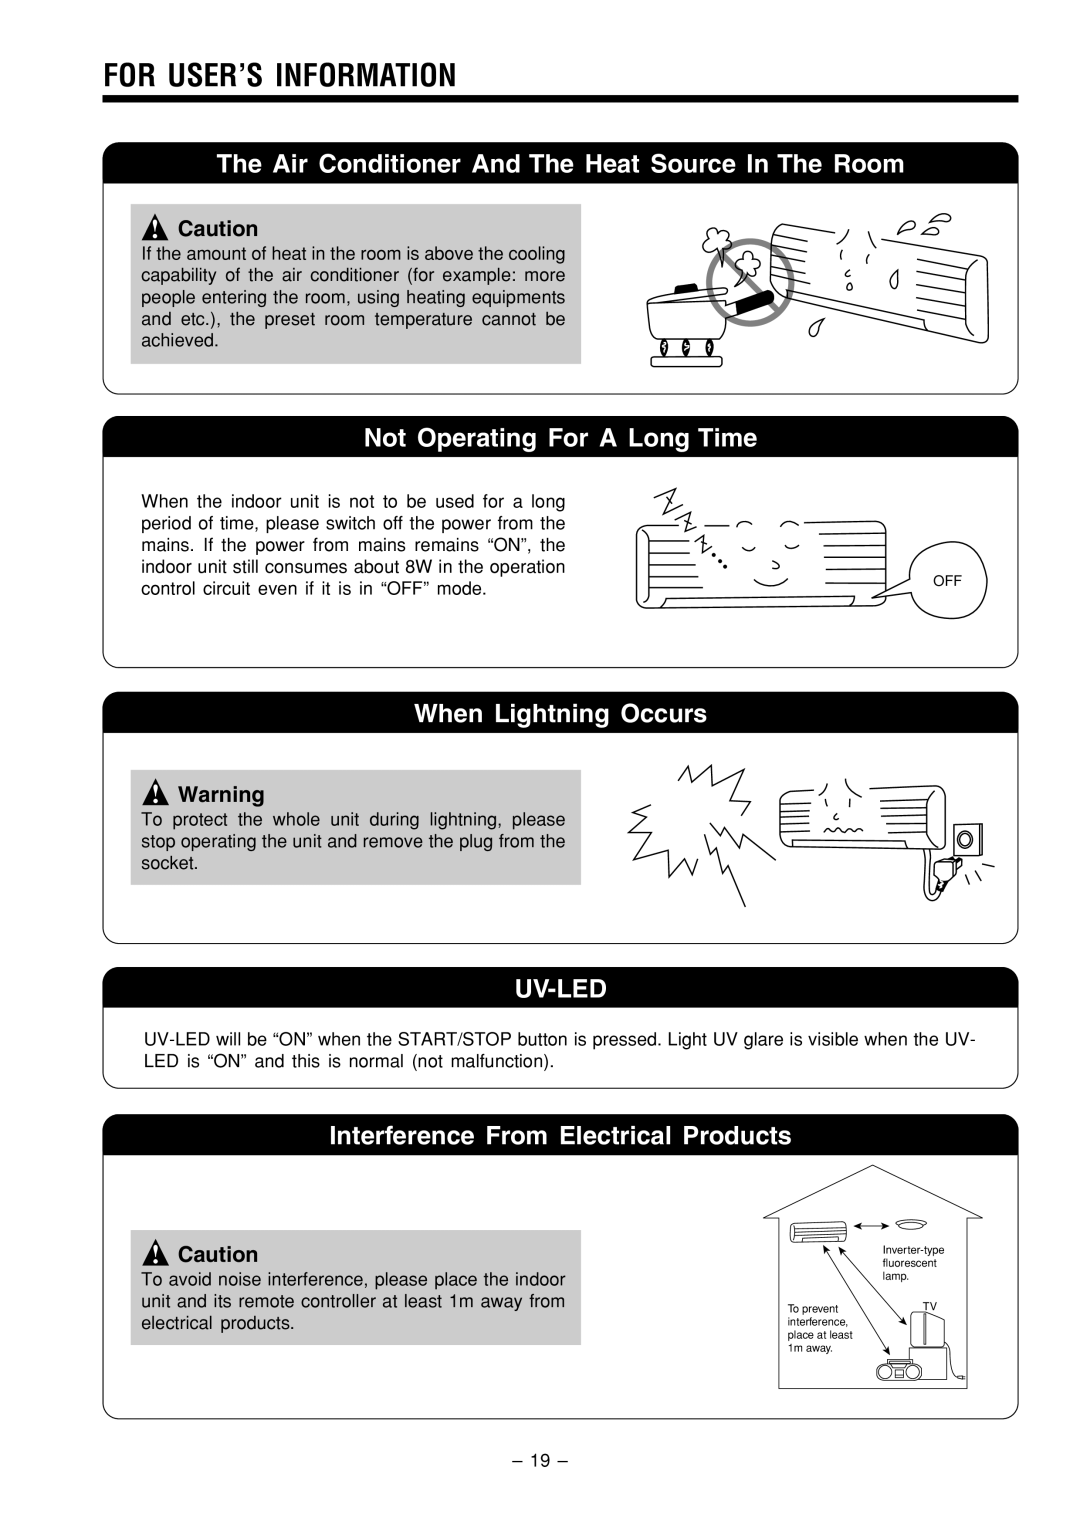 Hitachi RAS-80YHA instruction manual For User’S Information, Not Operating For A Long Time, When Lightning Occurs, Uv-Led 